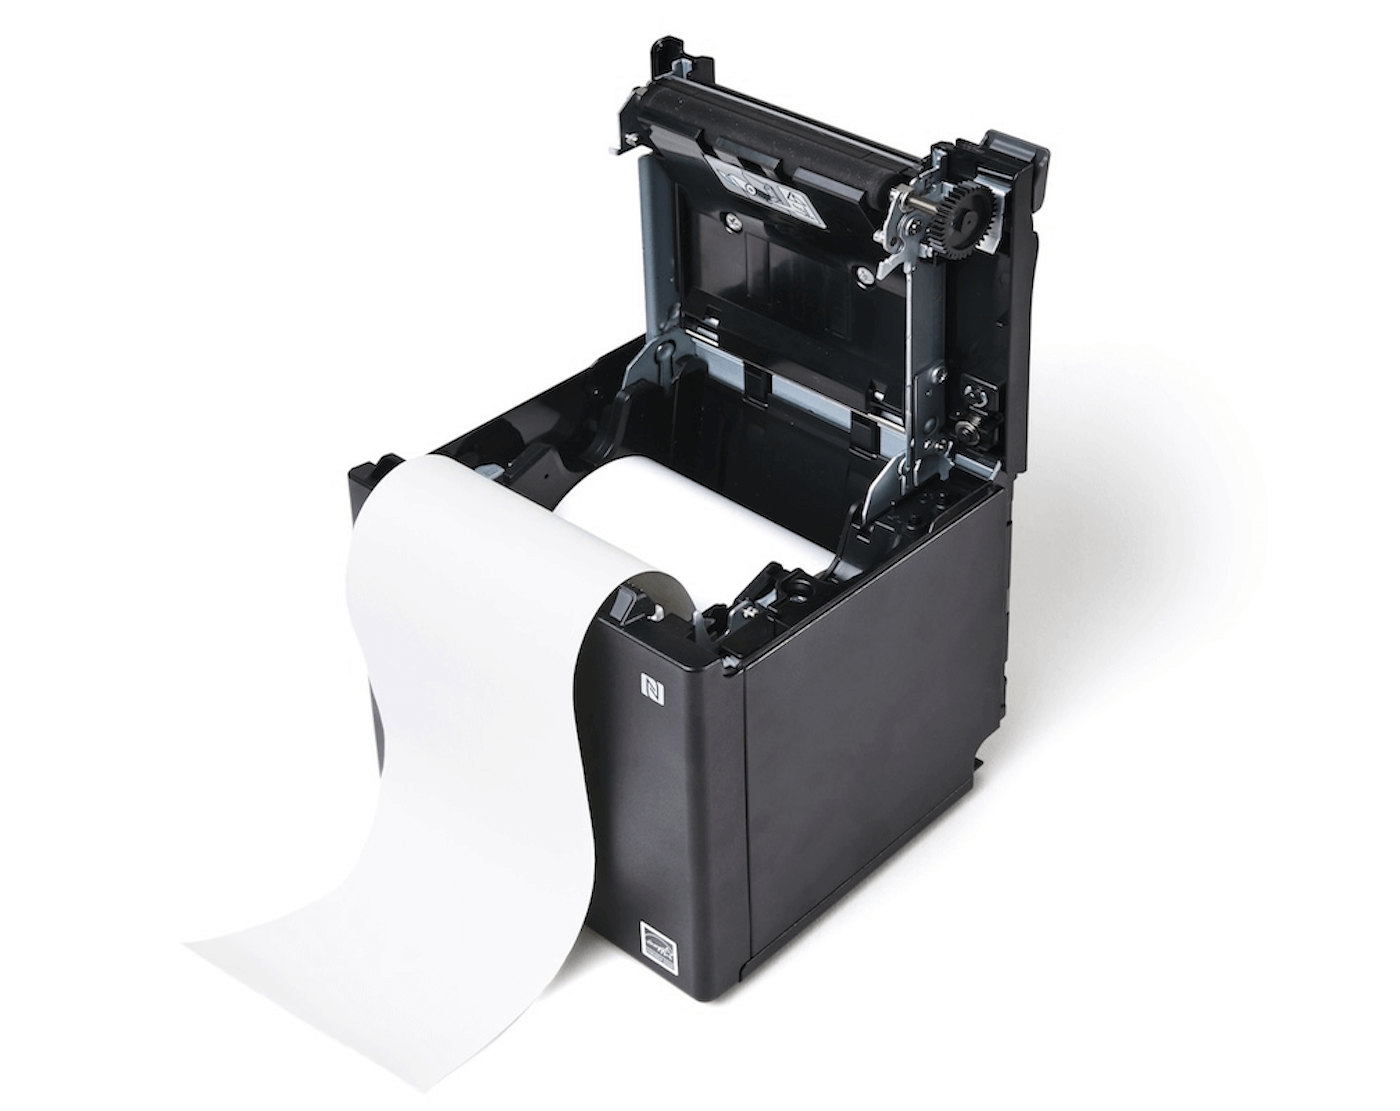 Printer with cover open and paper roll inserted so that it unrolls from the bottom, towards the user.